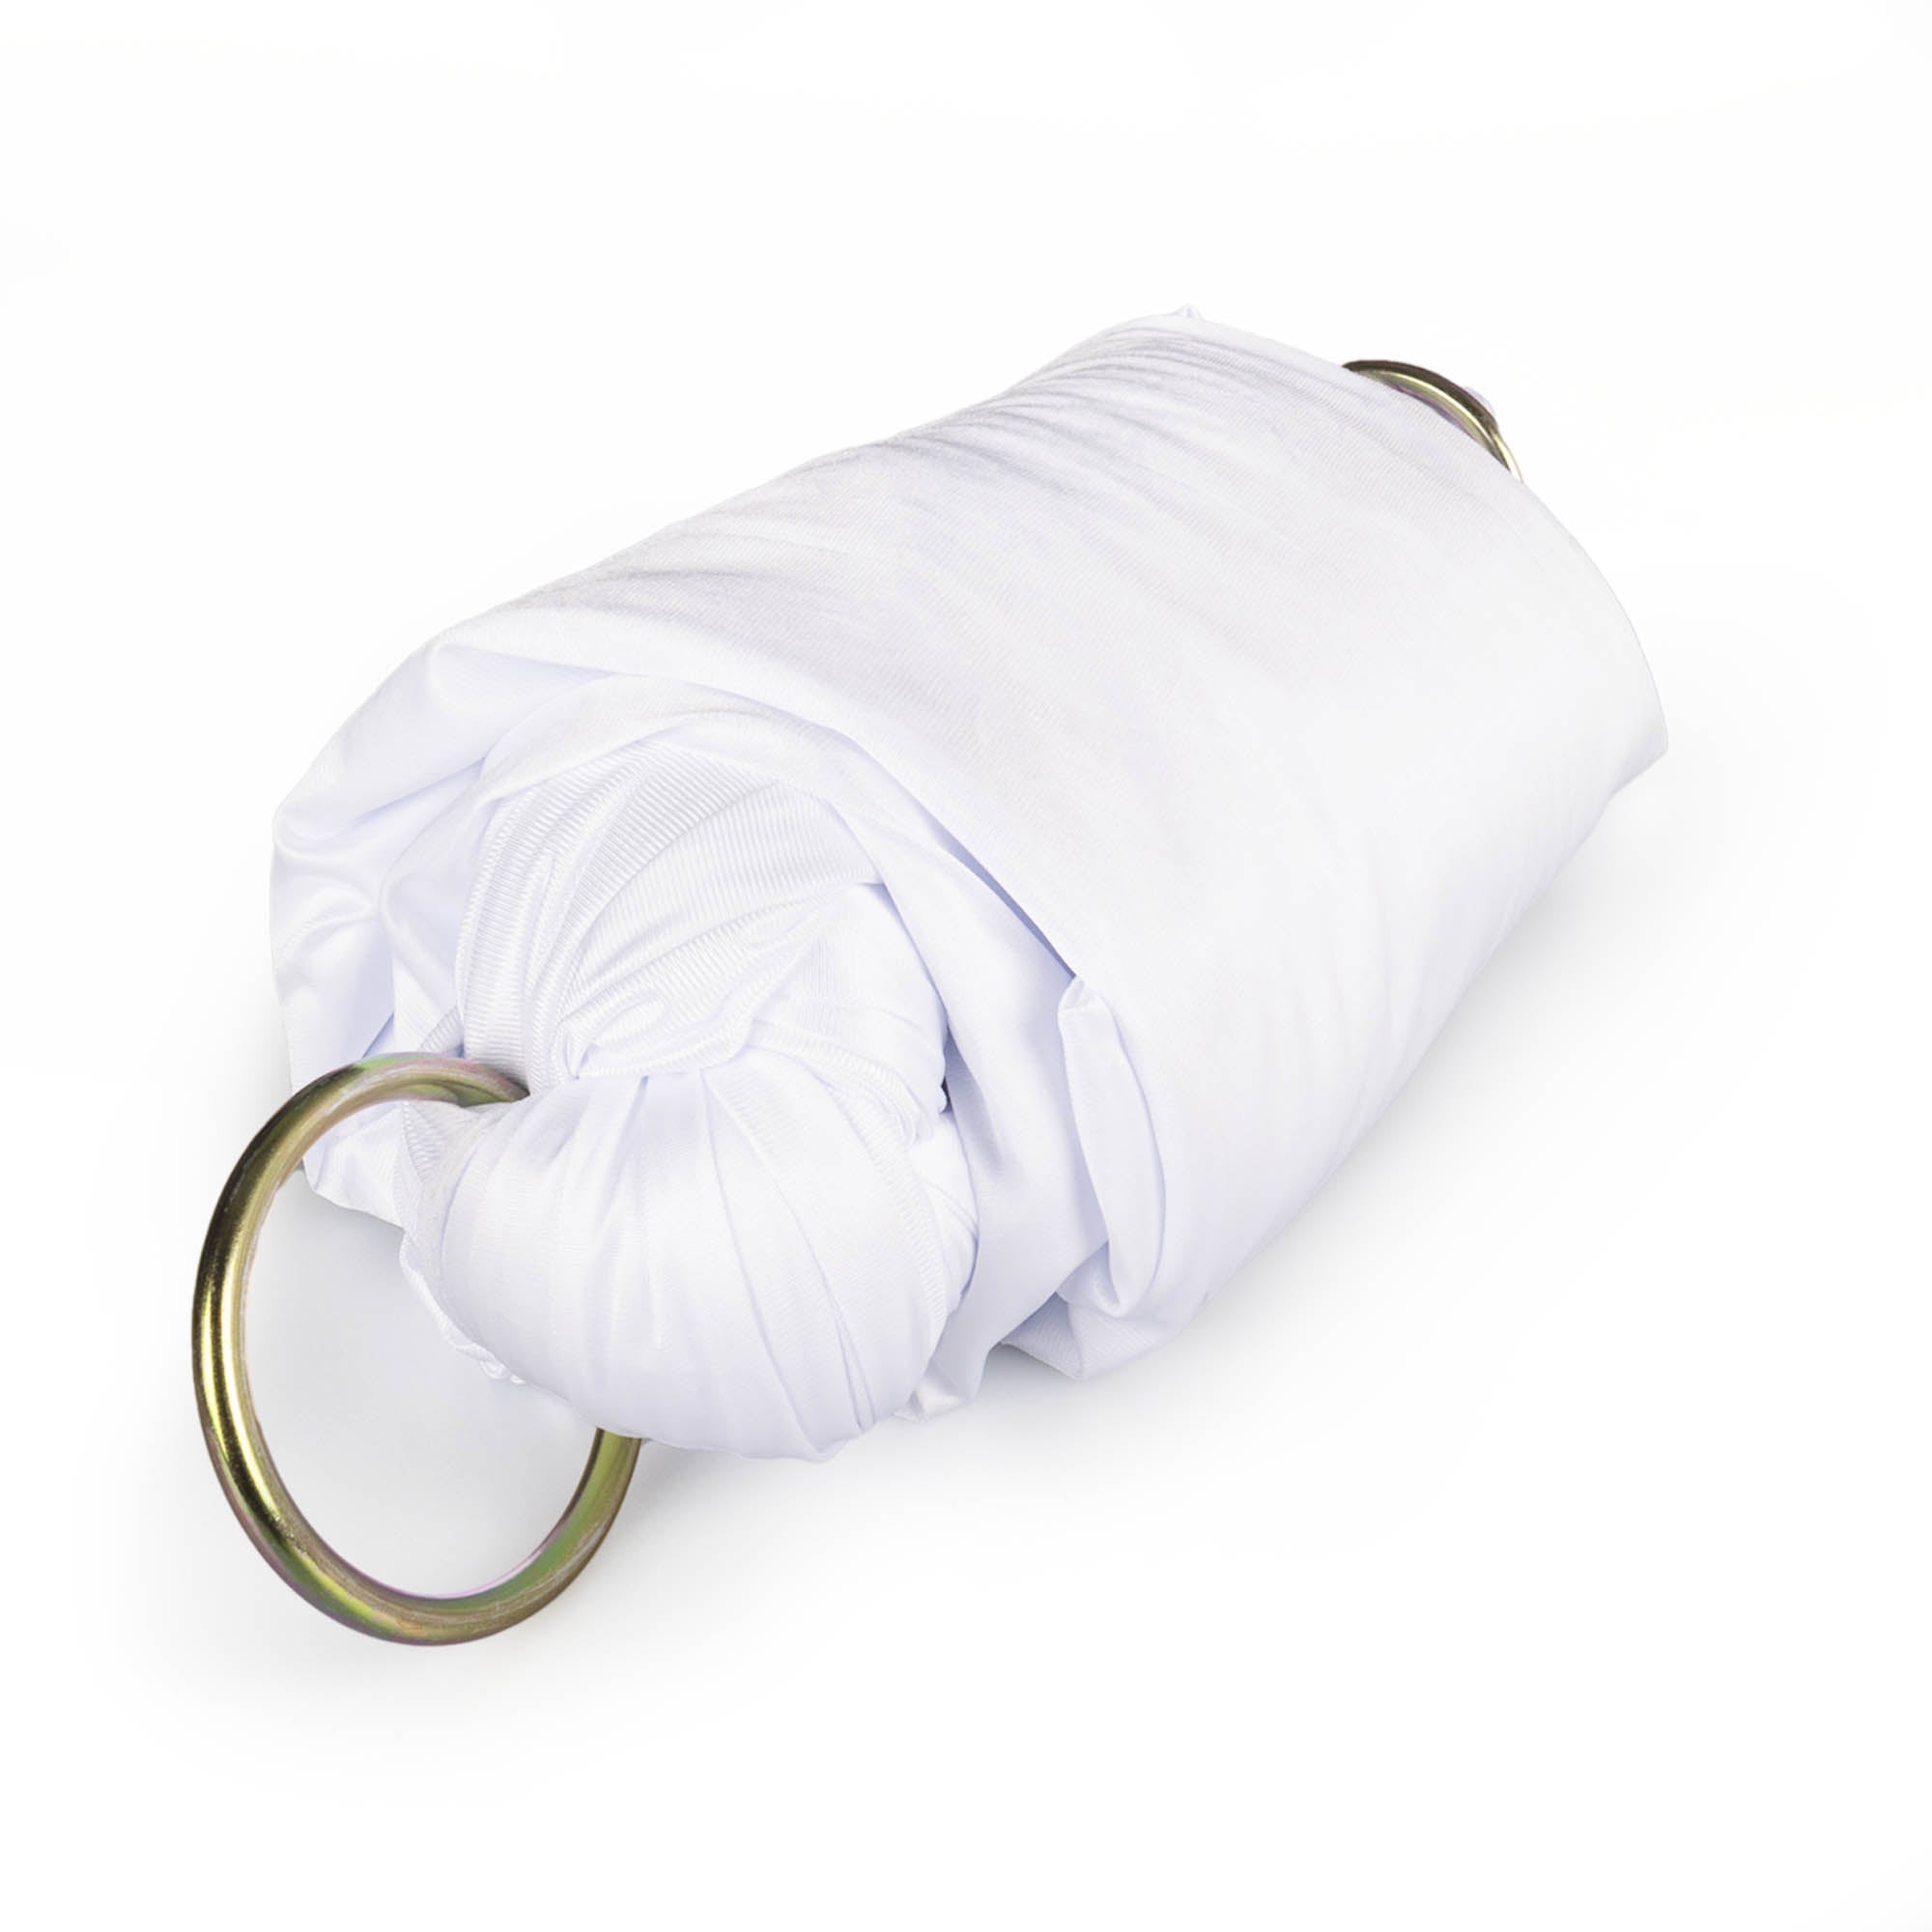 White yoga hammock rolled up with rings attached